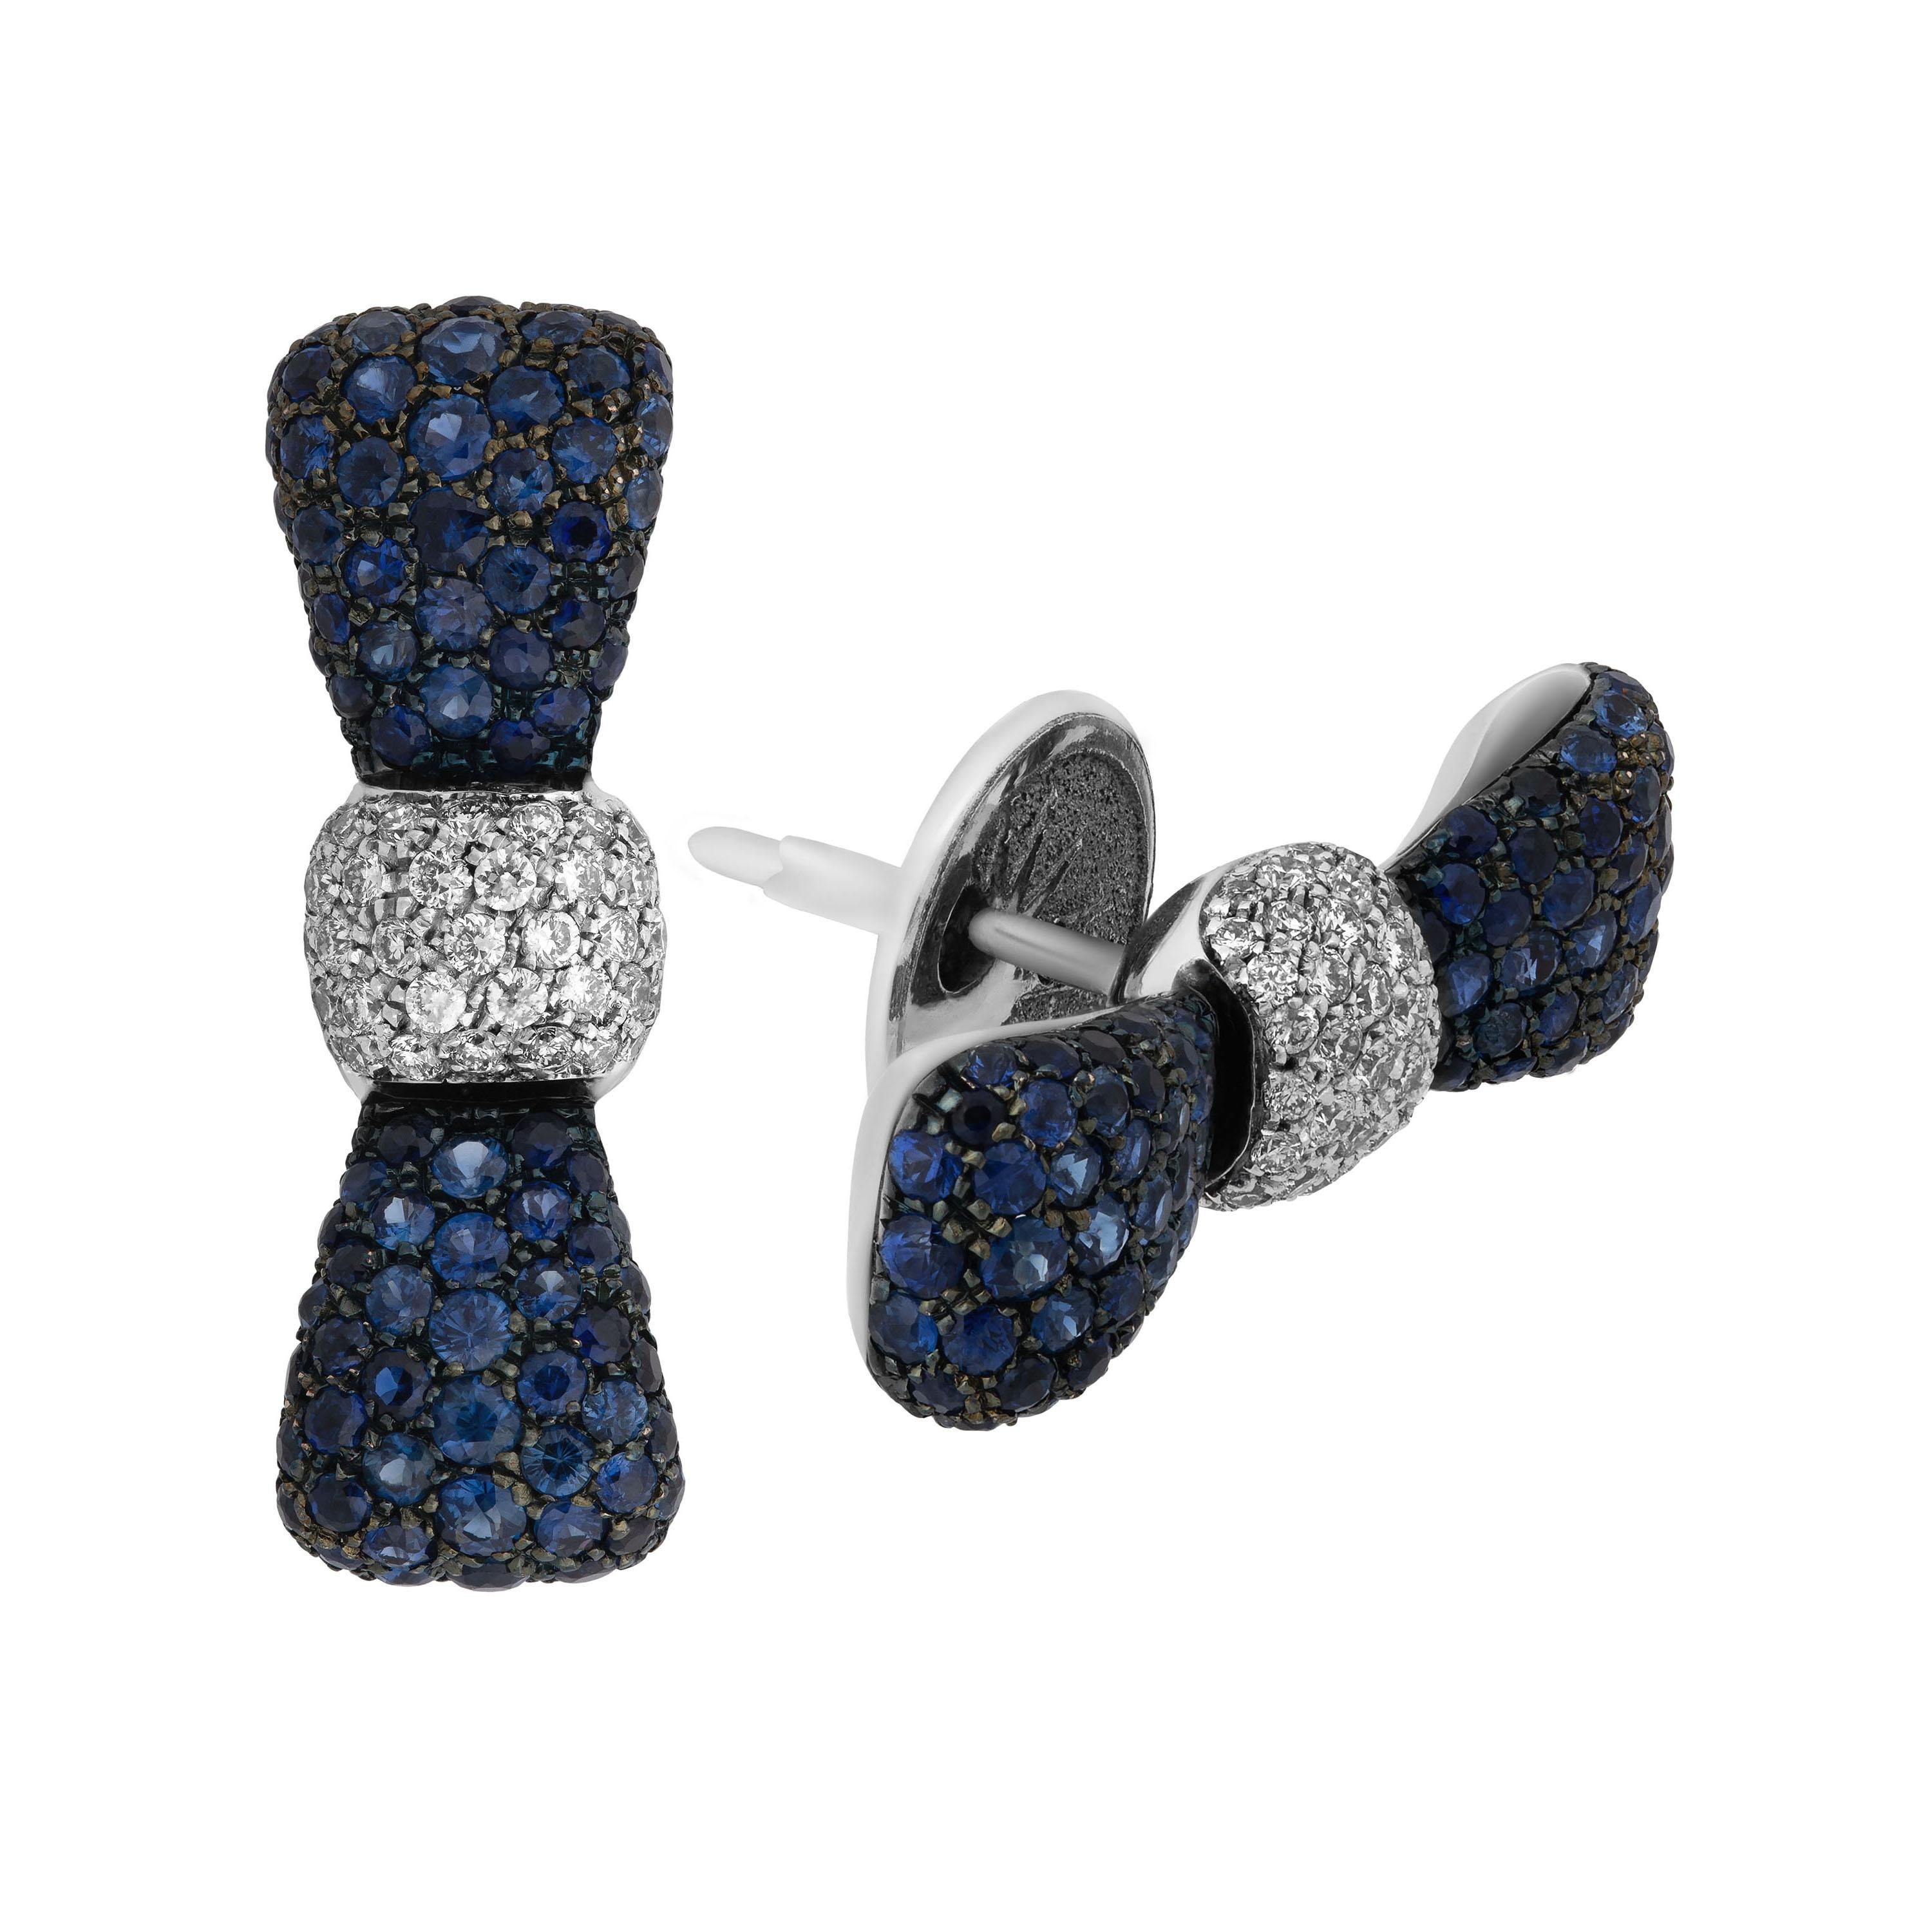 Contemporary Luca Carati 18k White Gold, Sapphire And Diamond Bow Stud Earrings